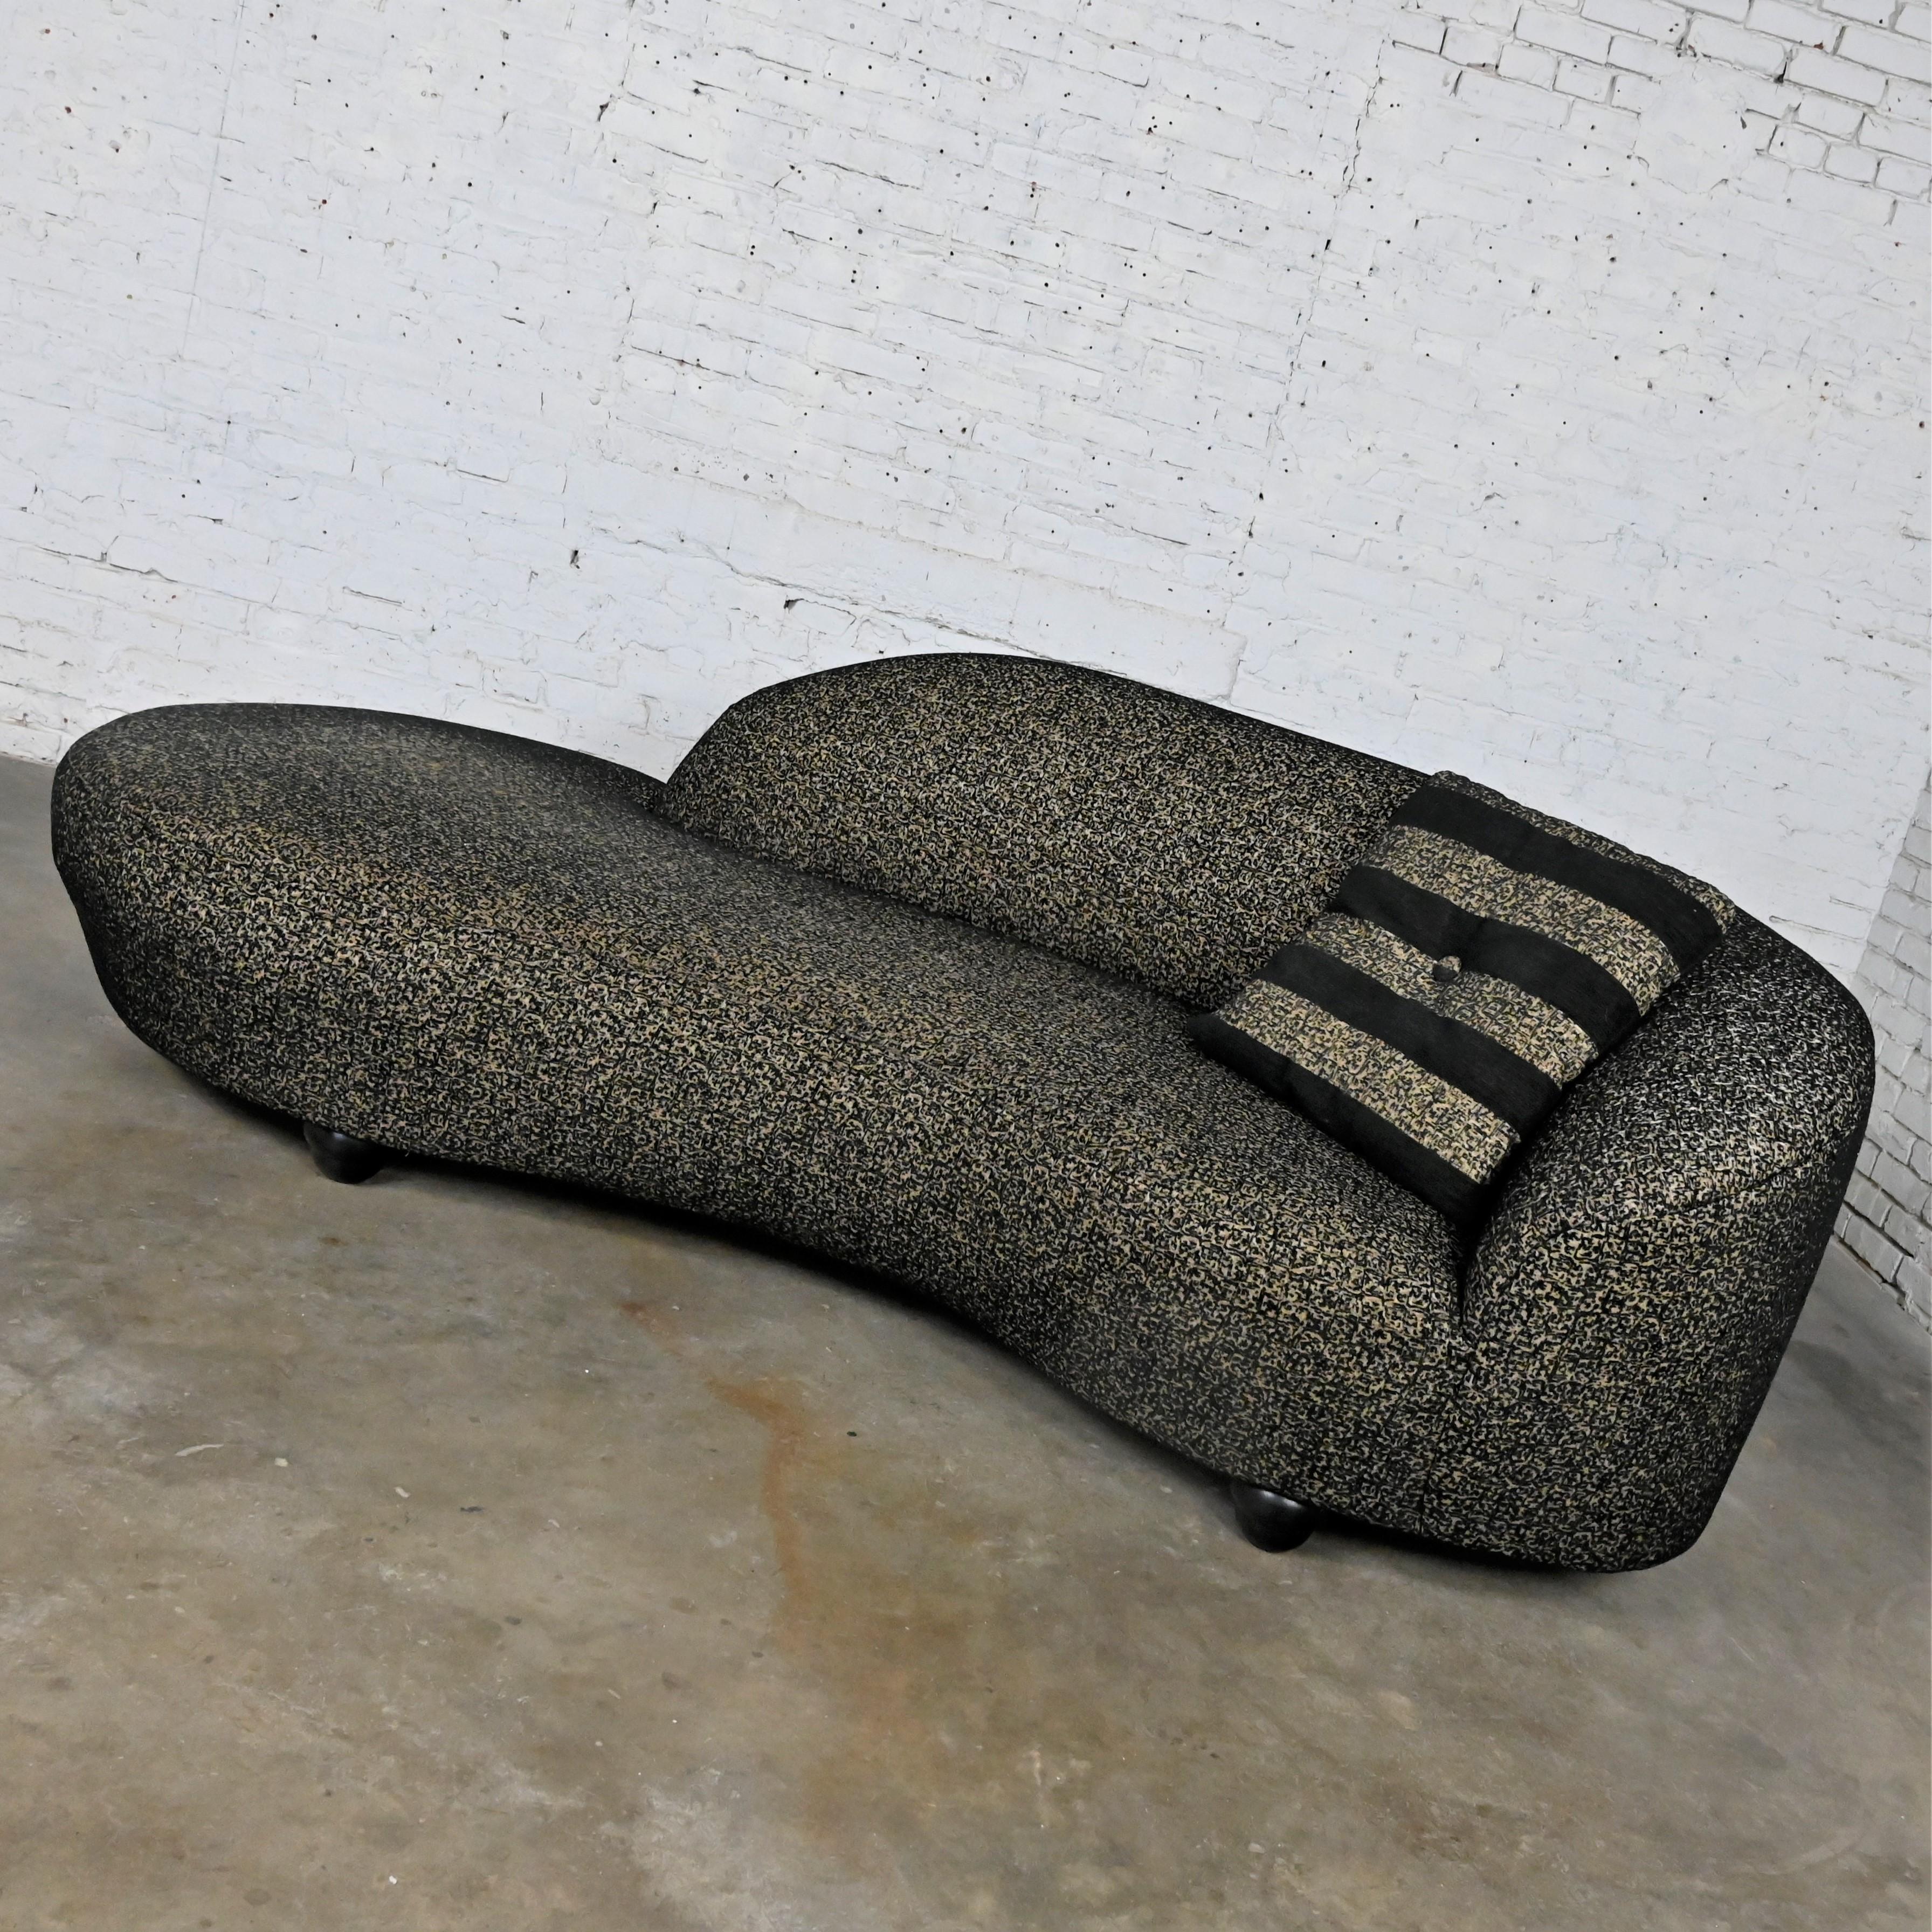 Handsome postmodern black and khaki sort of animal print serpentine cloud-like or biomorphic chaise or sofa with throw pillow on stacked concentric rounded legs. Beautiful condition, keeping in mind that this is vintage and not new so will have